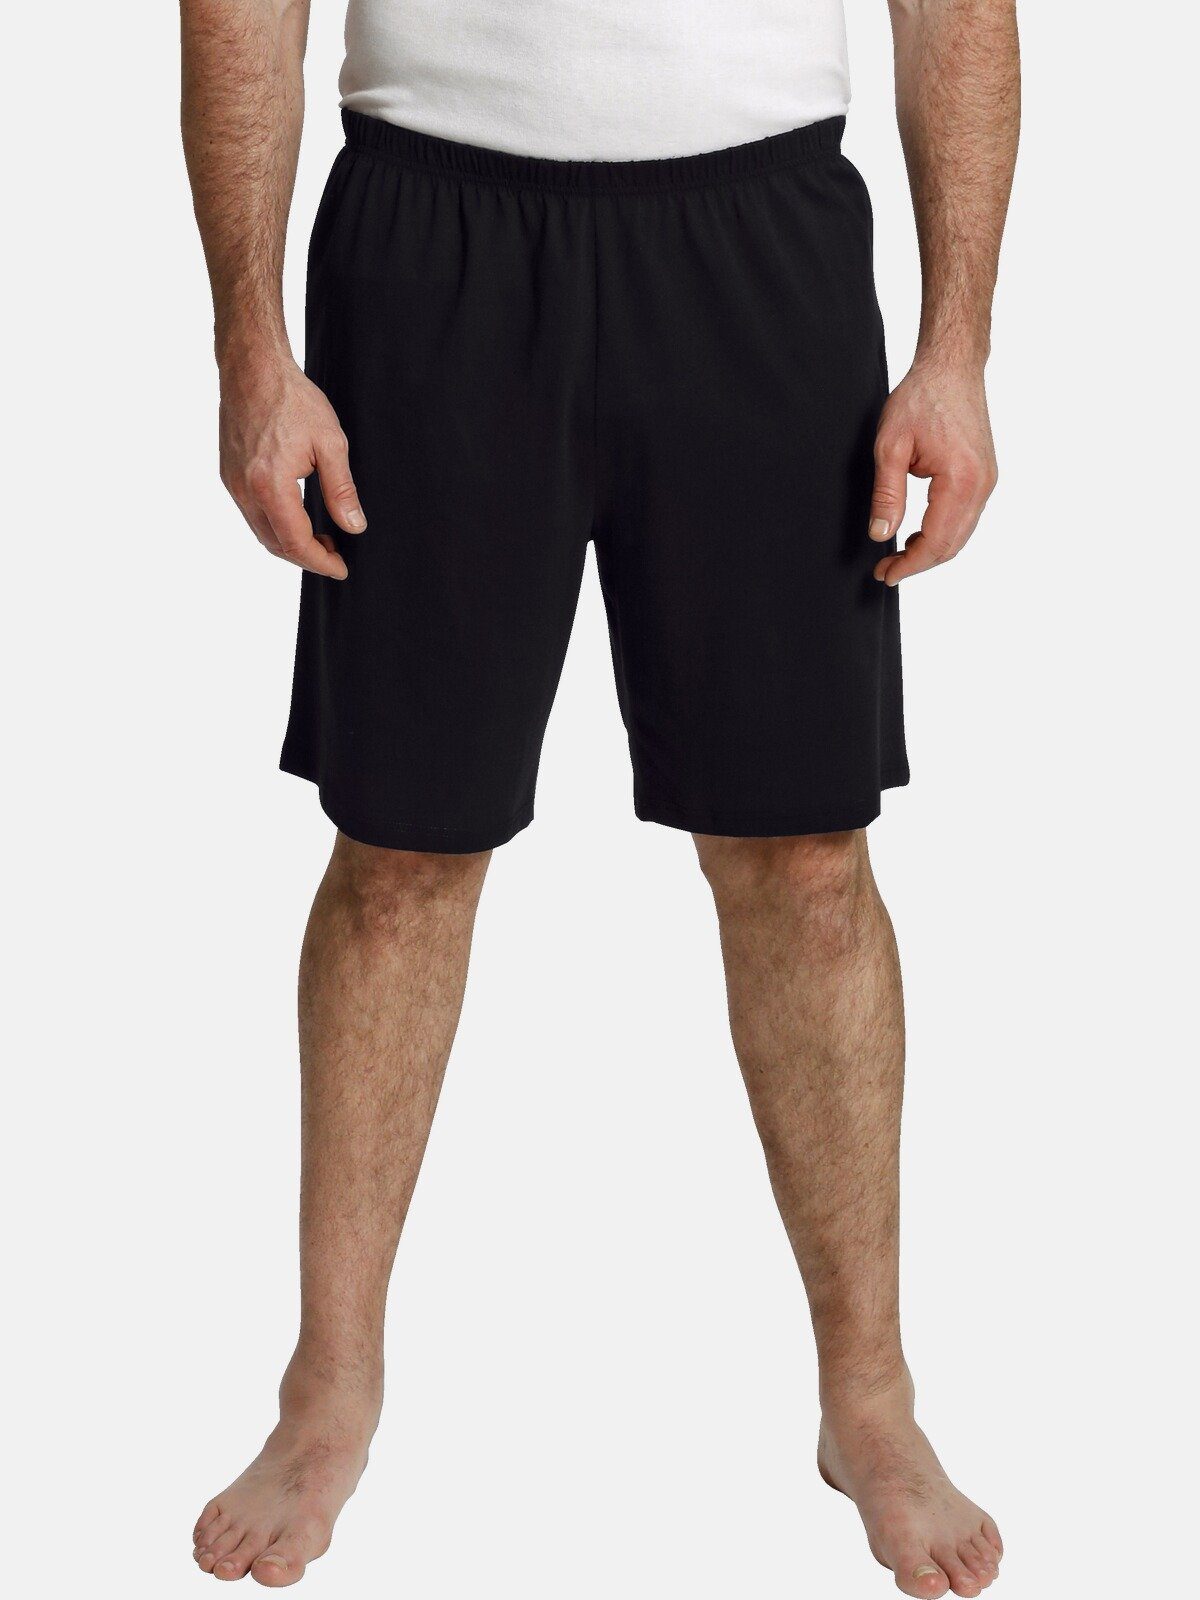 Charles Colby Schlafhose LORD MYCROFT leichte bequeme Relaxshorts schwarz